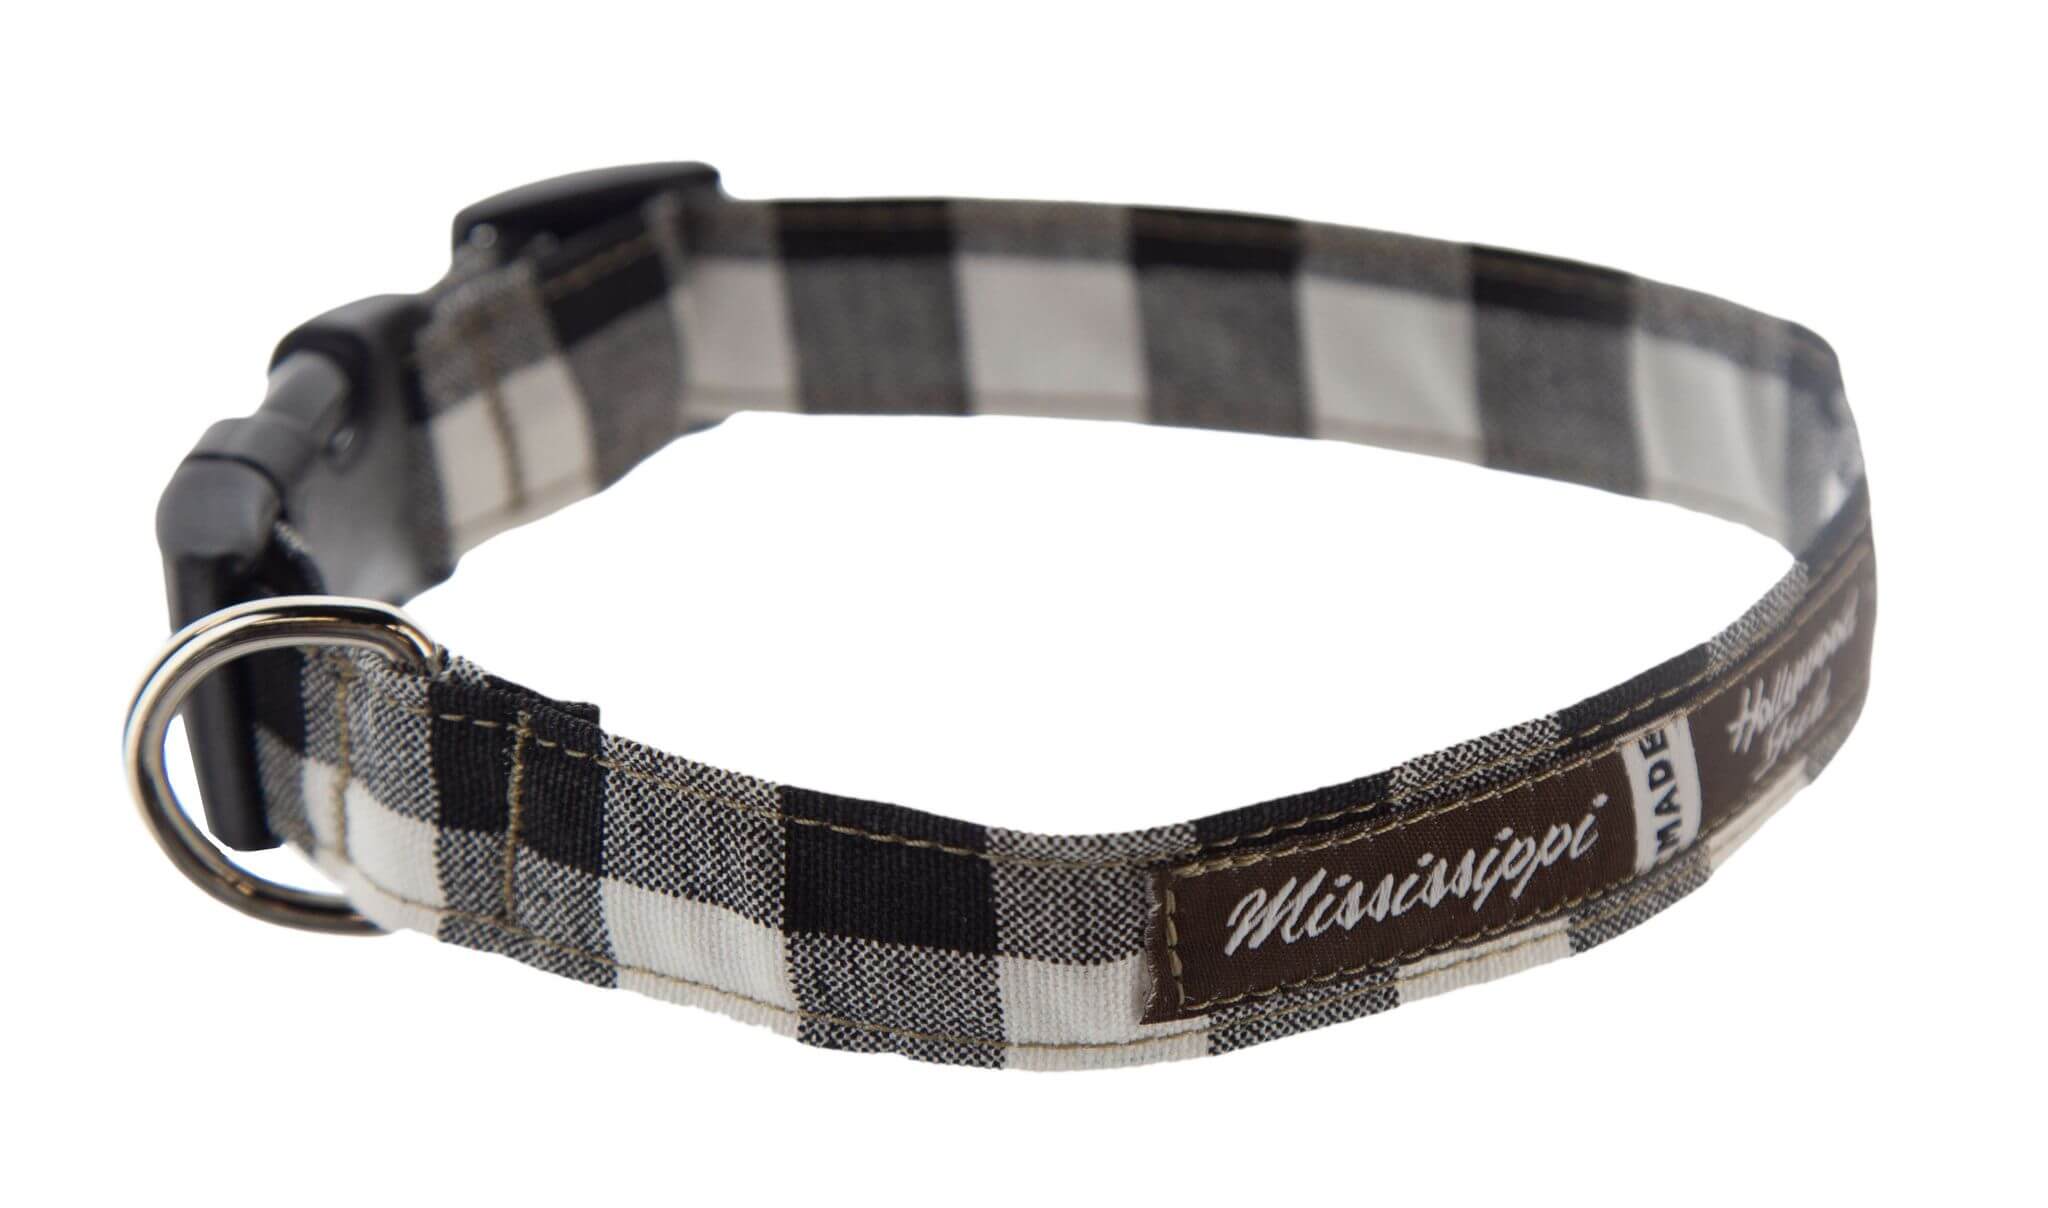 Hollywood feed mississippi made dog collar - assorted limited edition (black check)